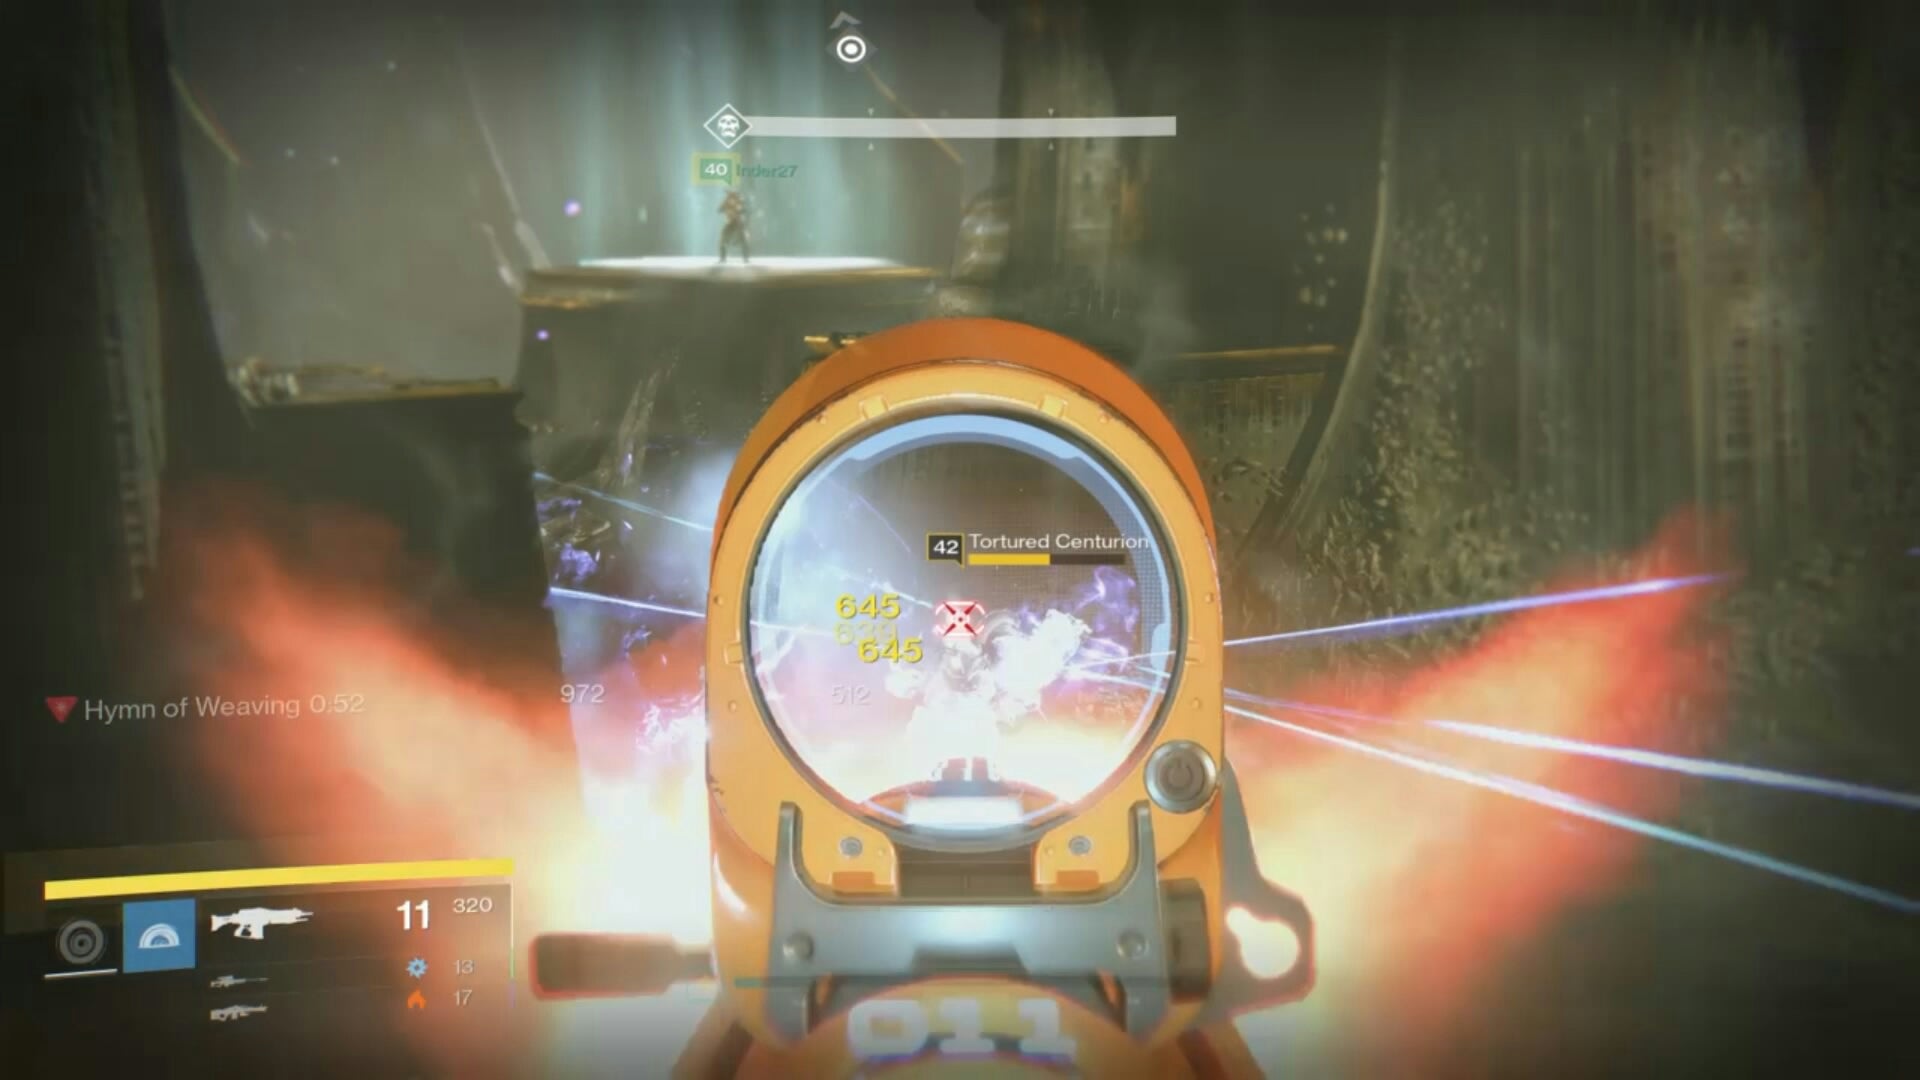 Image for Destiny’s King’s Fall Raid guide - How to kill the Daughters of Oryx